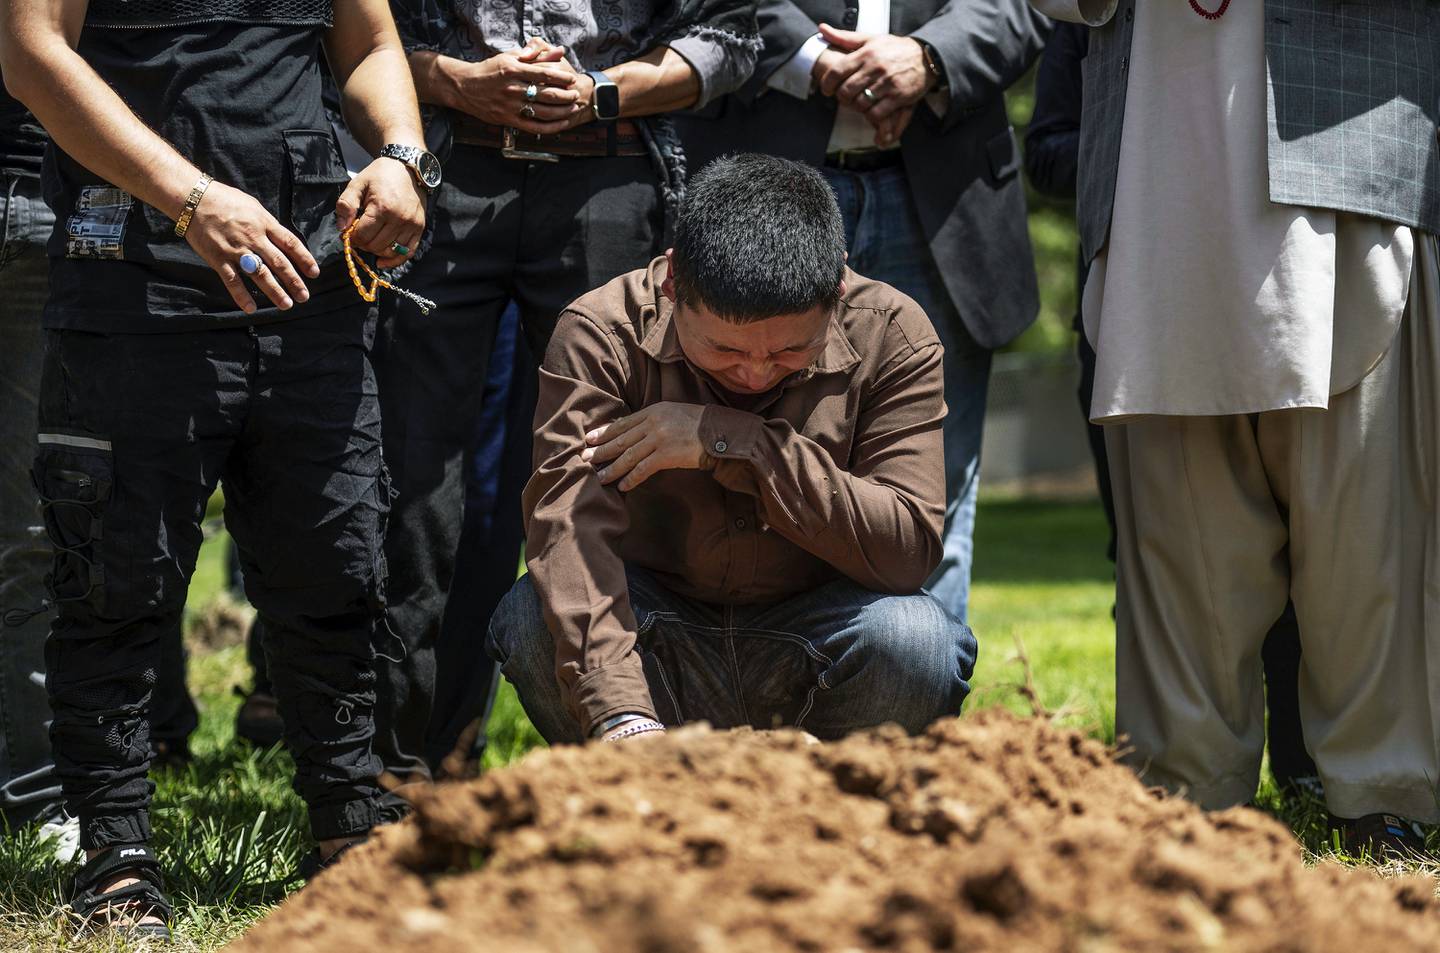 Altaf Hussain cries over the grave of his brother Aftab Hussein at Fairview Memorial Park in Albuquerque, New Mexico. The Albuquerque Journal / AP